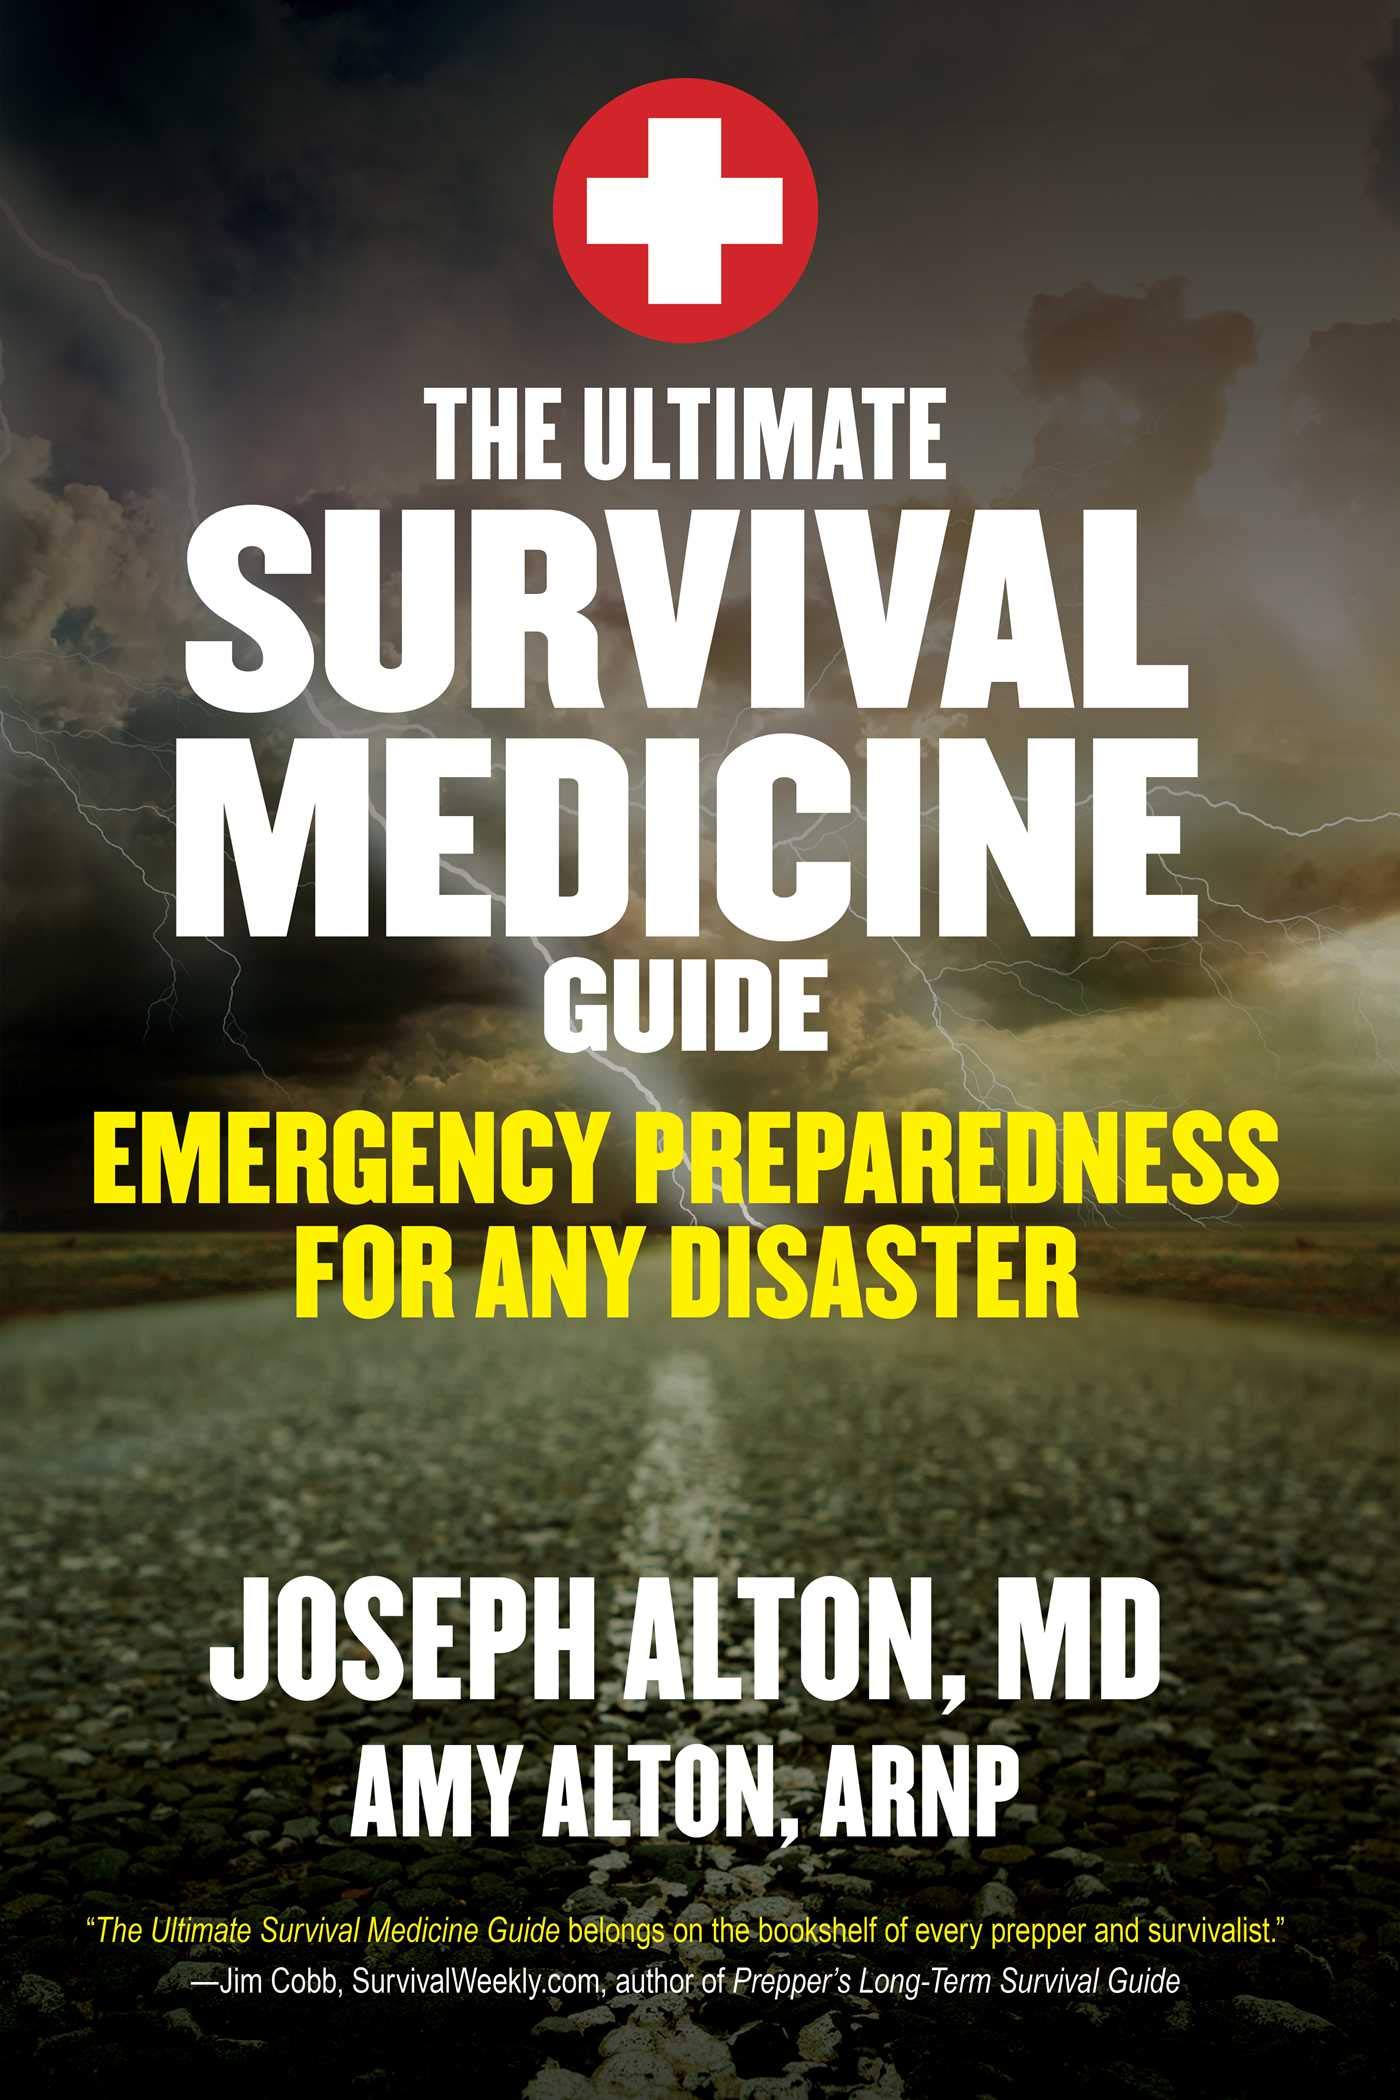 The Ultimate Survival Medicine Guide: Emergency Preparedness for ANY Disaster, by Joseph and Amy Alton - Survival (and Other) Books About the COVID-19 Coronavirus - Survival Books - Survival, Sustainable Living